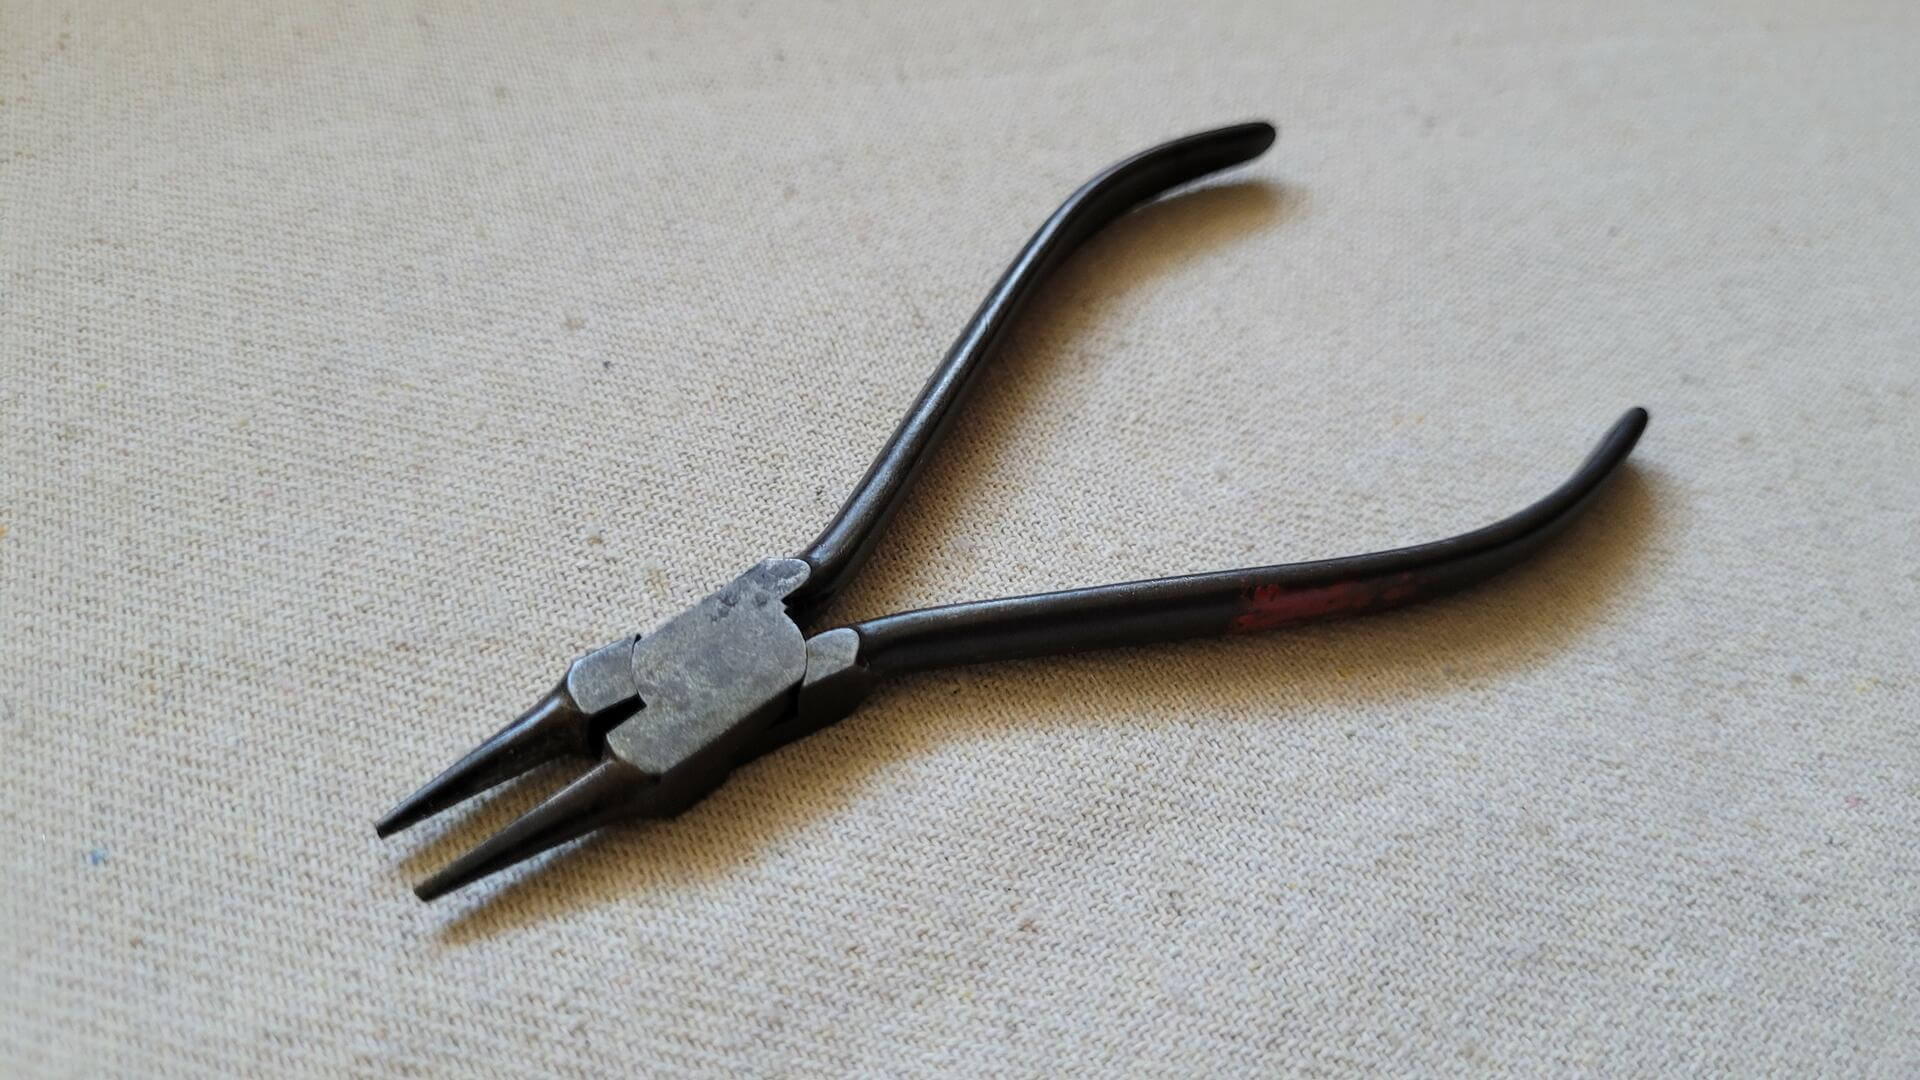 Rare vintage Vaco 9102, old Klein Tools brand round nose pliers 5 inches long. Antique made in USA collectible jewelry hand tools